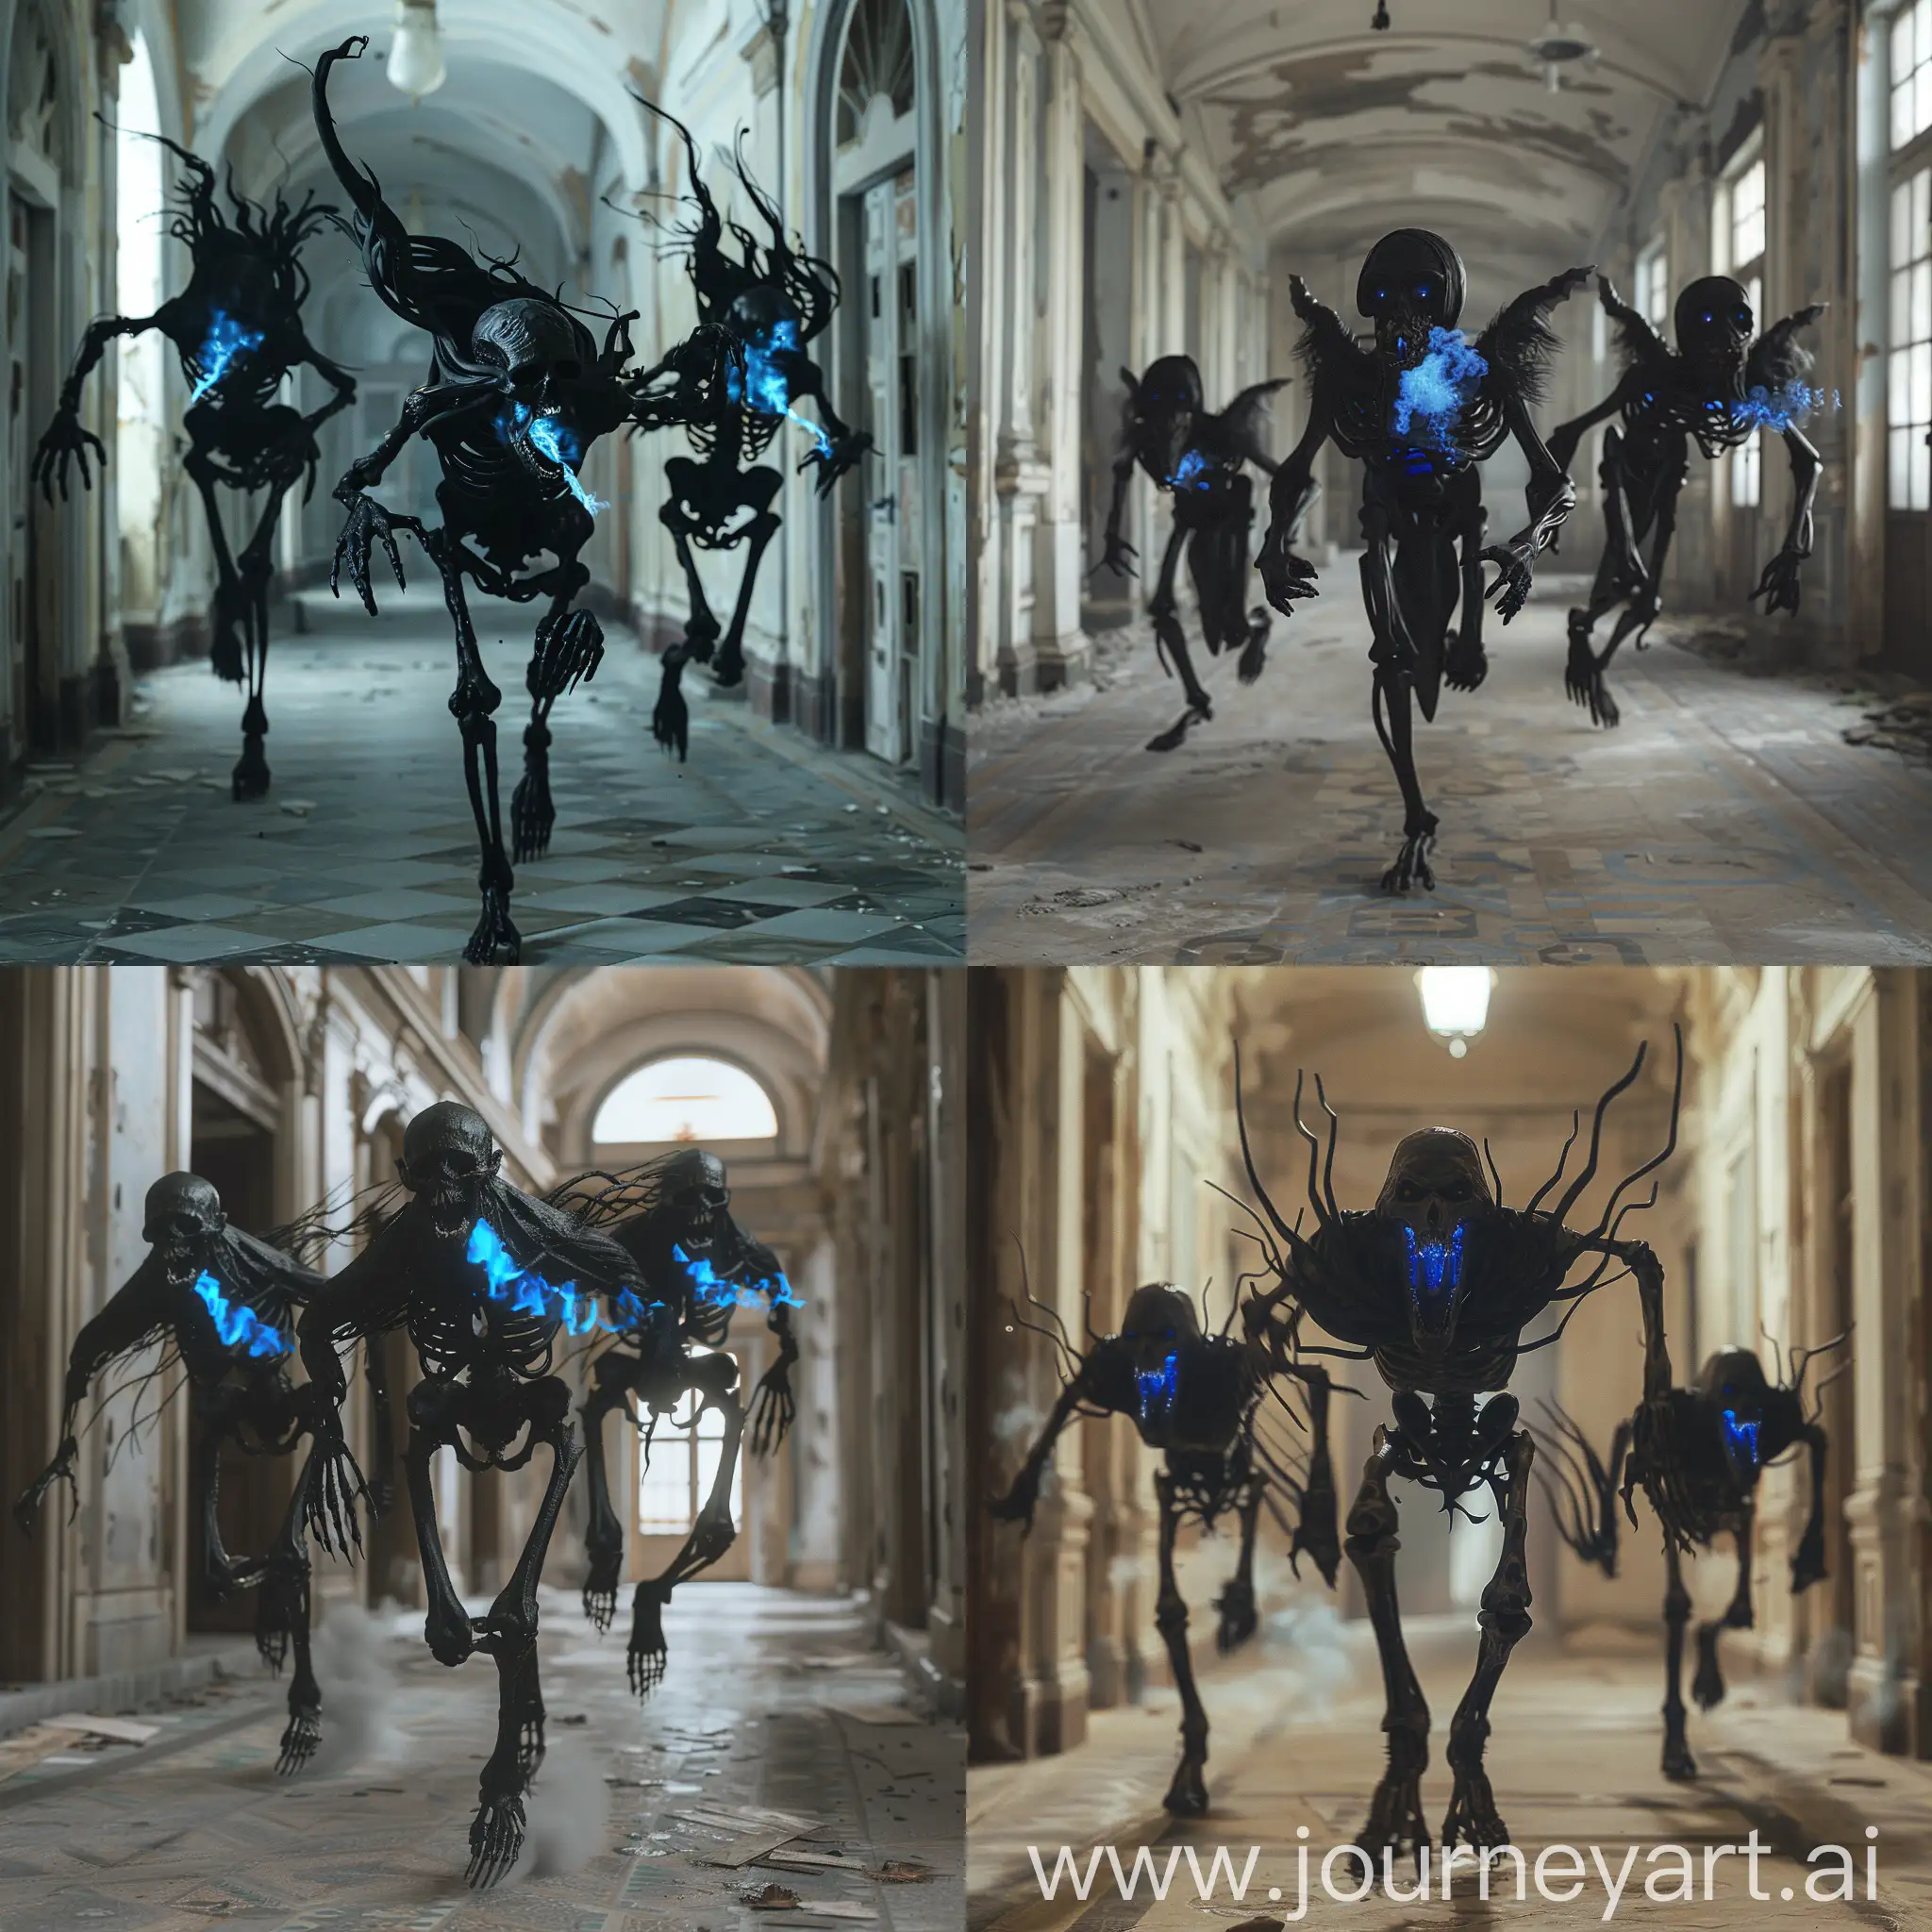 Epic-HyperRealistic-Black-Skeletons-with-Blue-Fire-Running-in-Abandoned-Building